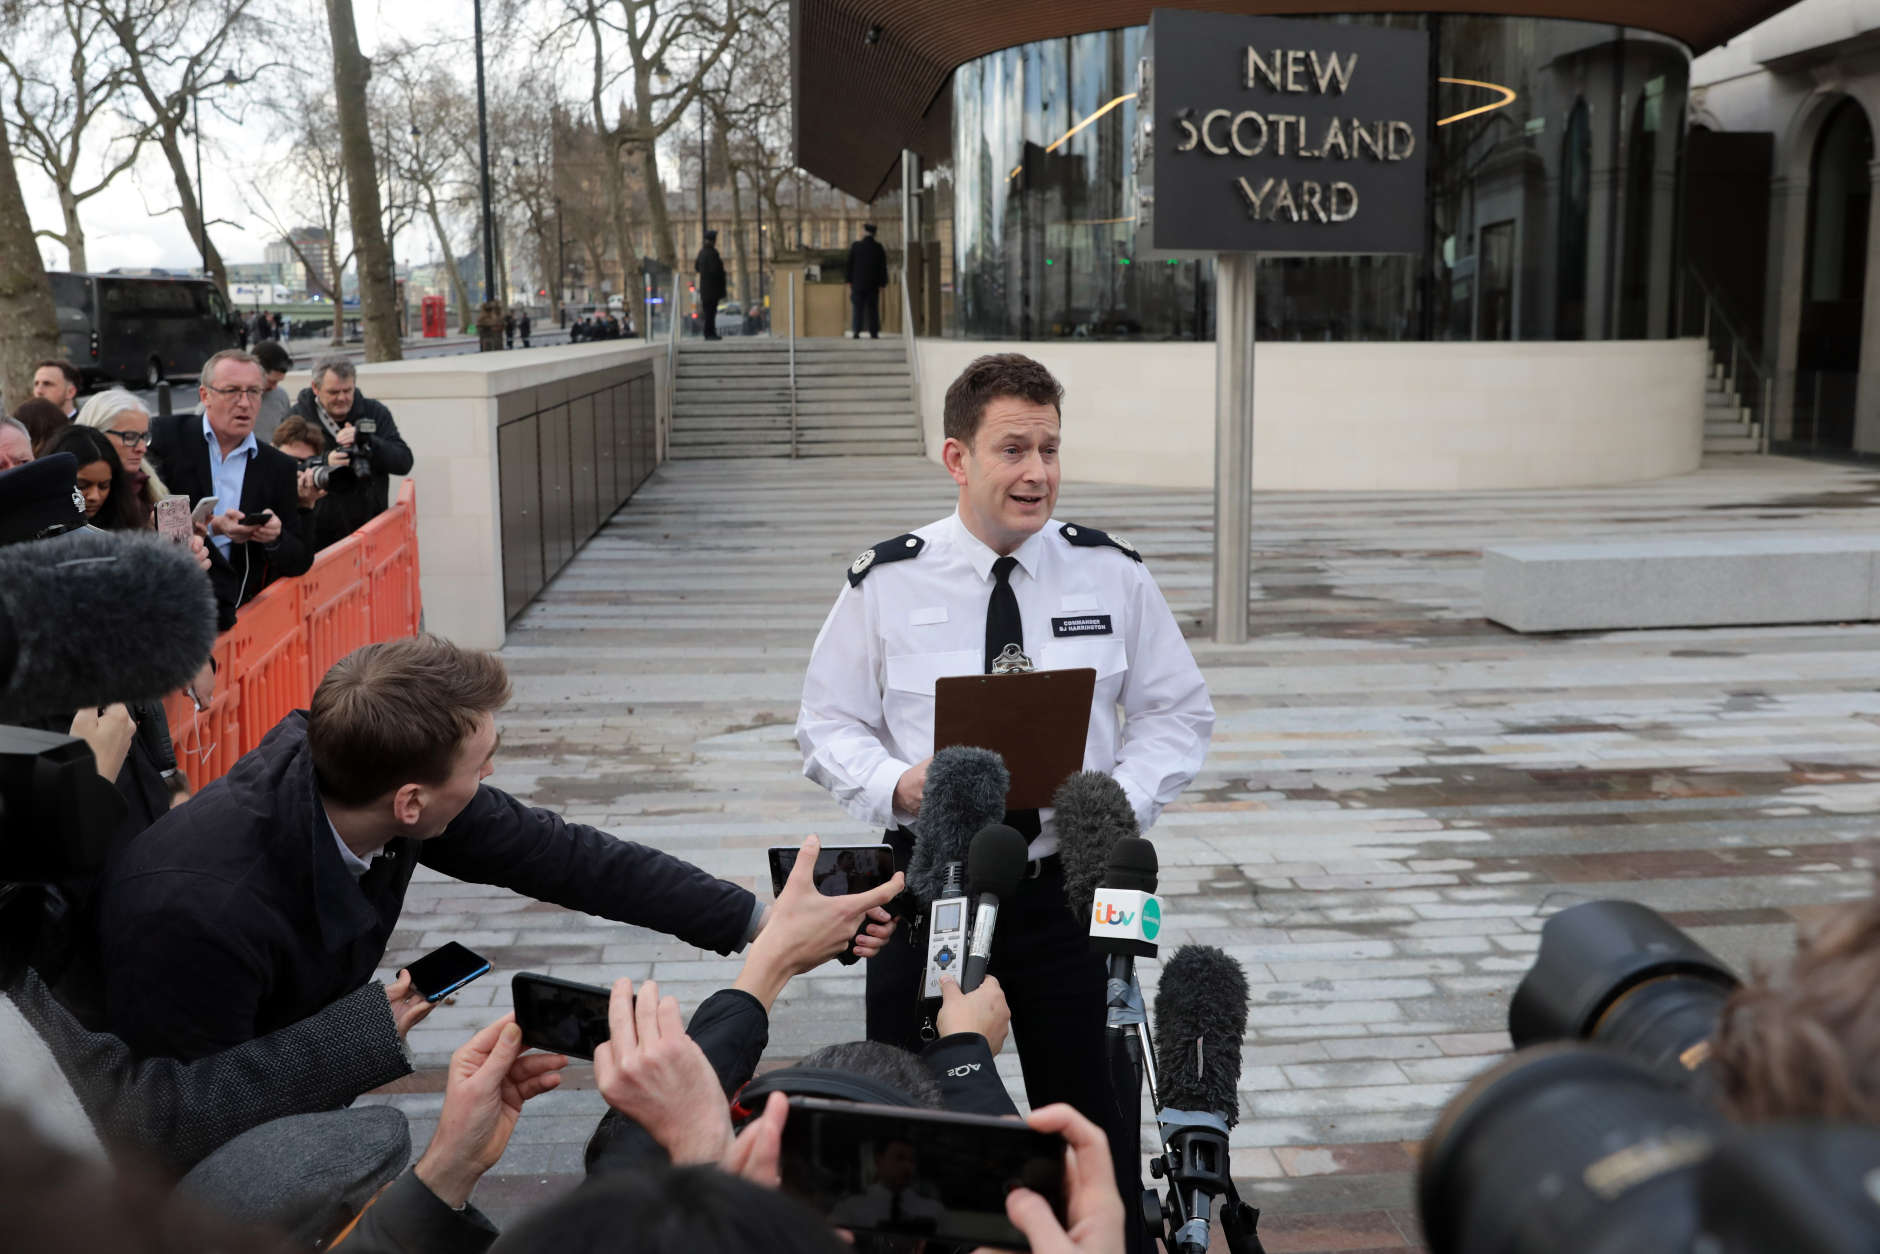 LONDON, ENGLAND - MARCH 22:  Commander BJ Harrington of the Metropolitan Police makes a statement outside of New Scotland Yard on March 22, 2017 in London, England.  A police officer has been stabbed near to the British Parliament and the alleged assailant shot by armed police. Scotland Yard report they have been called to an incident on Westminster Bridge where several people have been injured by a car.  (Photo by Jack Taylor/Getty Images)